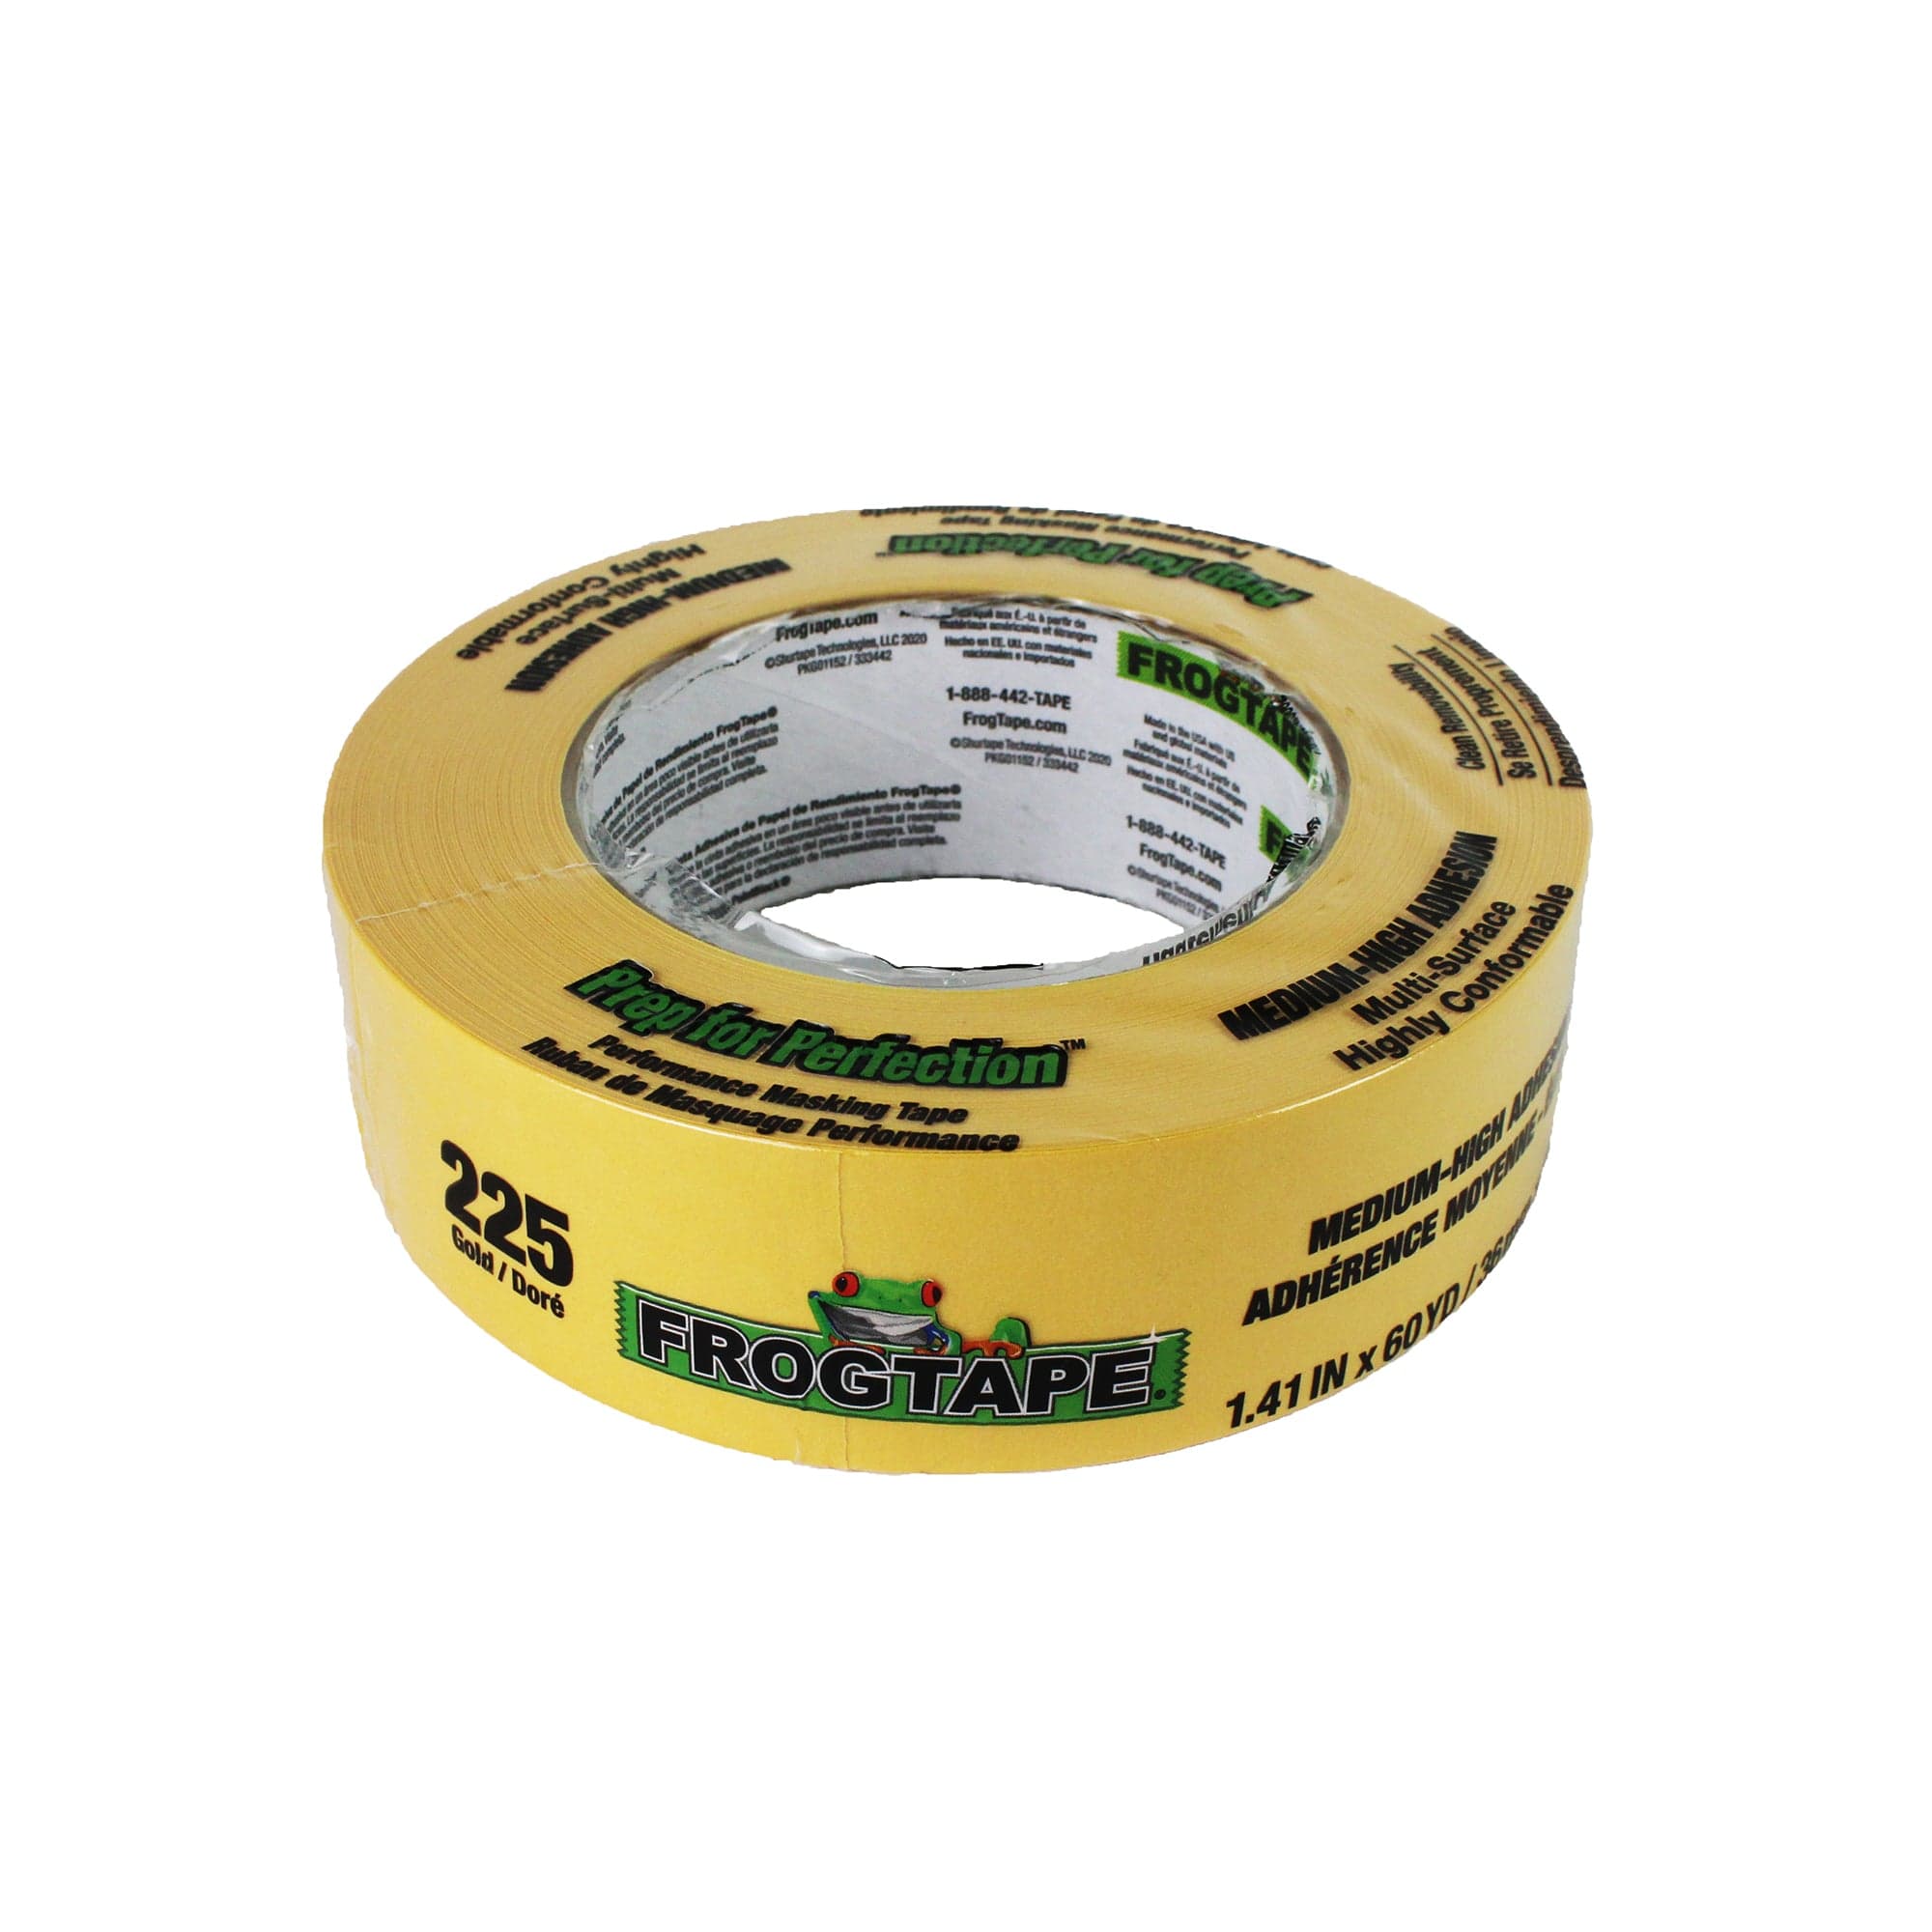 FrogTape CP 225 36mmx55m Gold Performance Masking Tape, Medium-High Adhesion, Moderate Temperature 105375 Shurtape